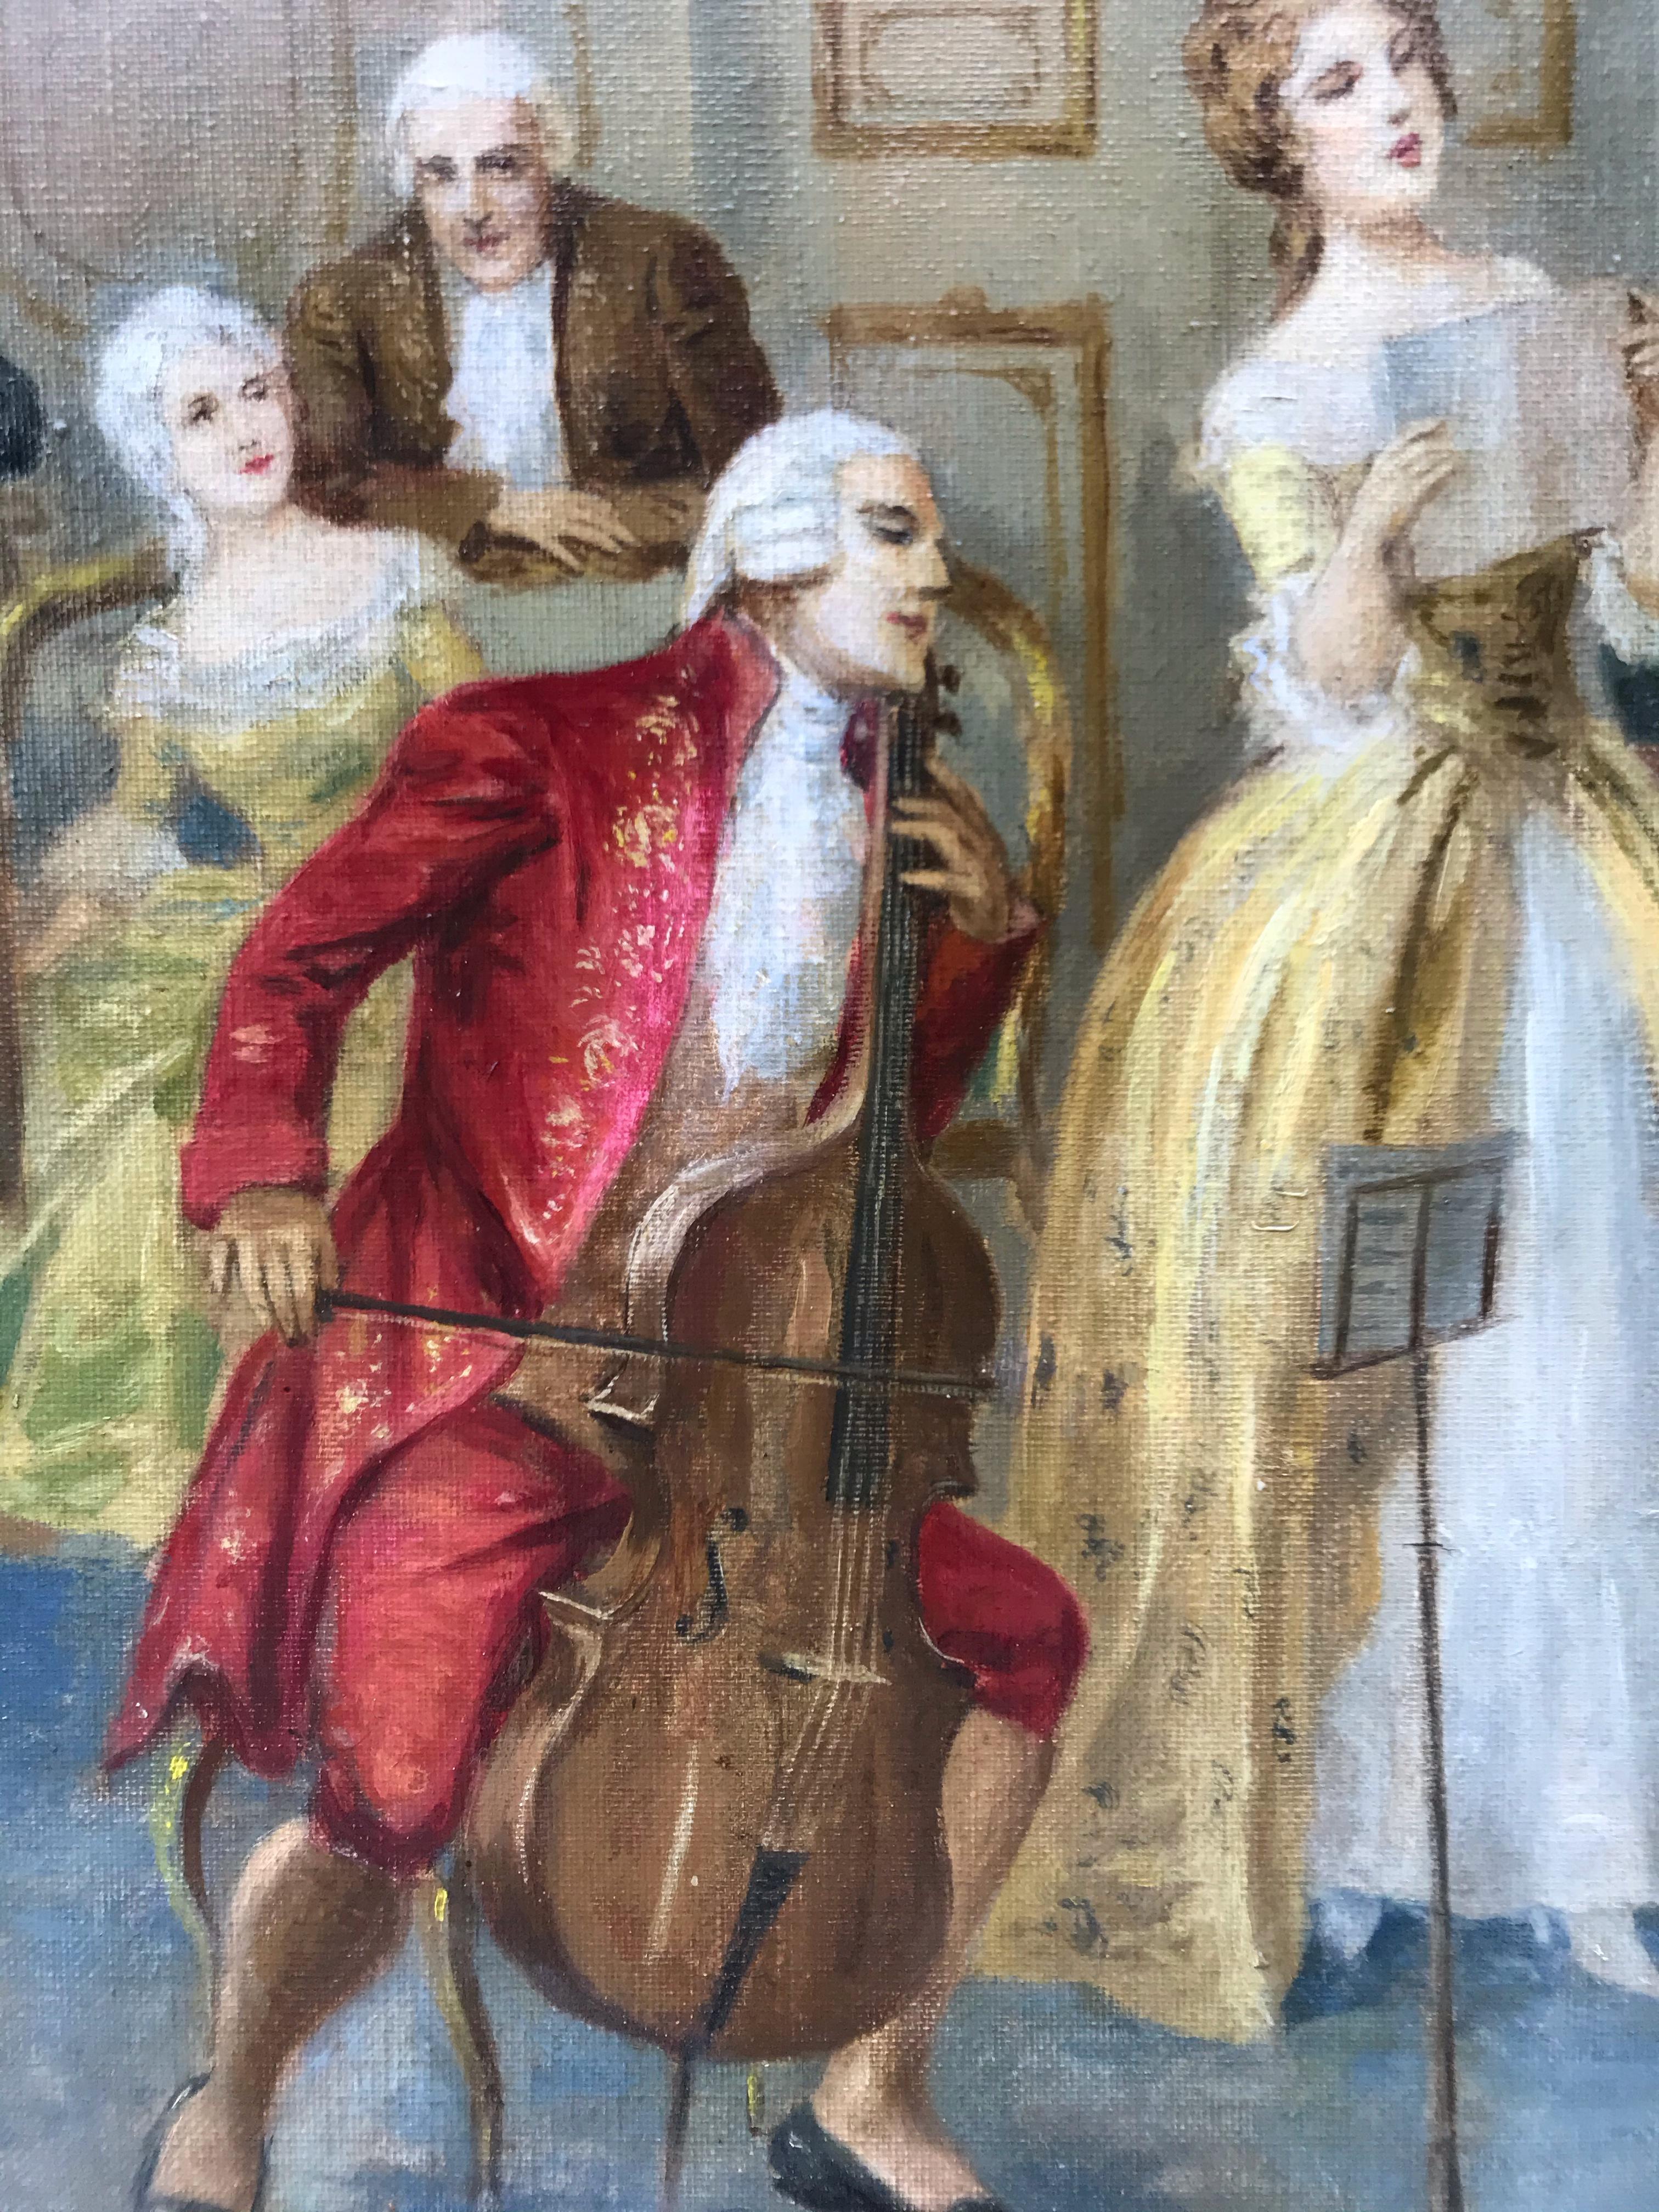 Private Music Concert in the 18th Century 7